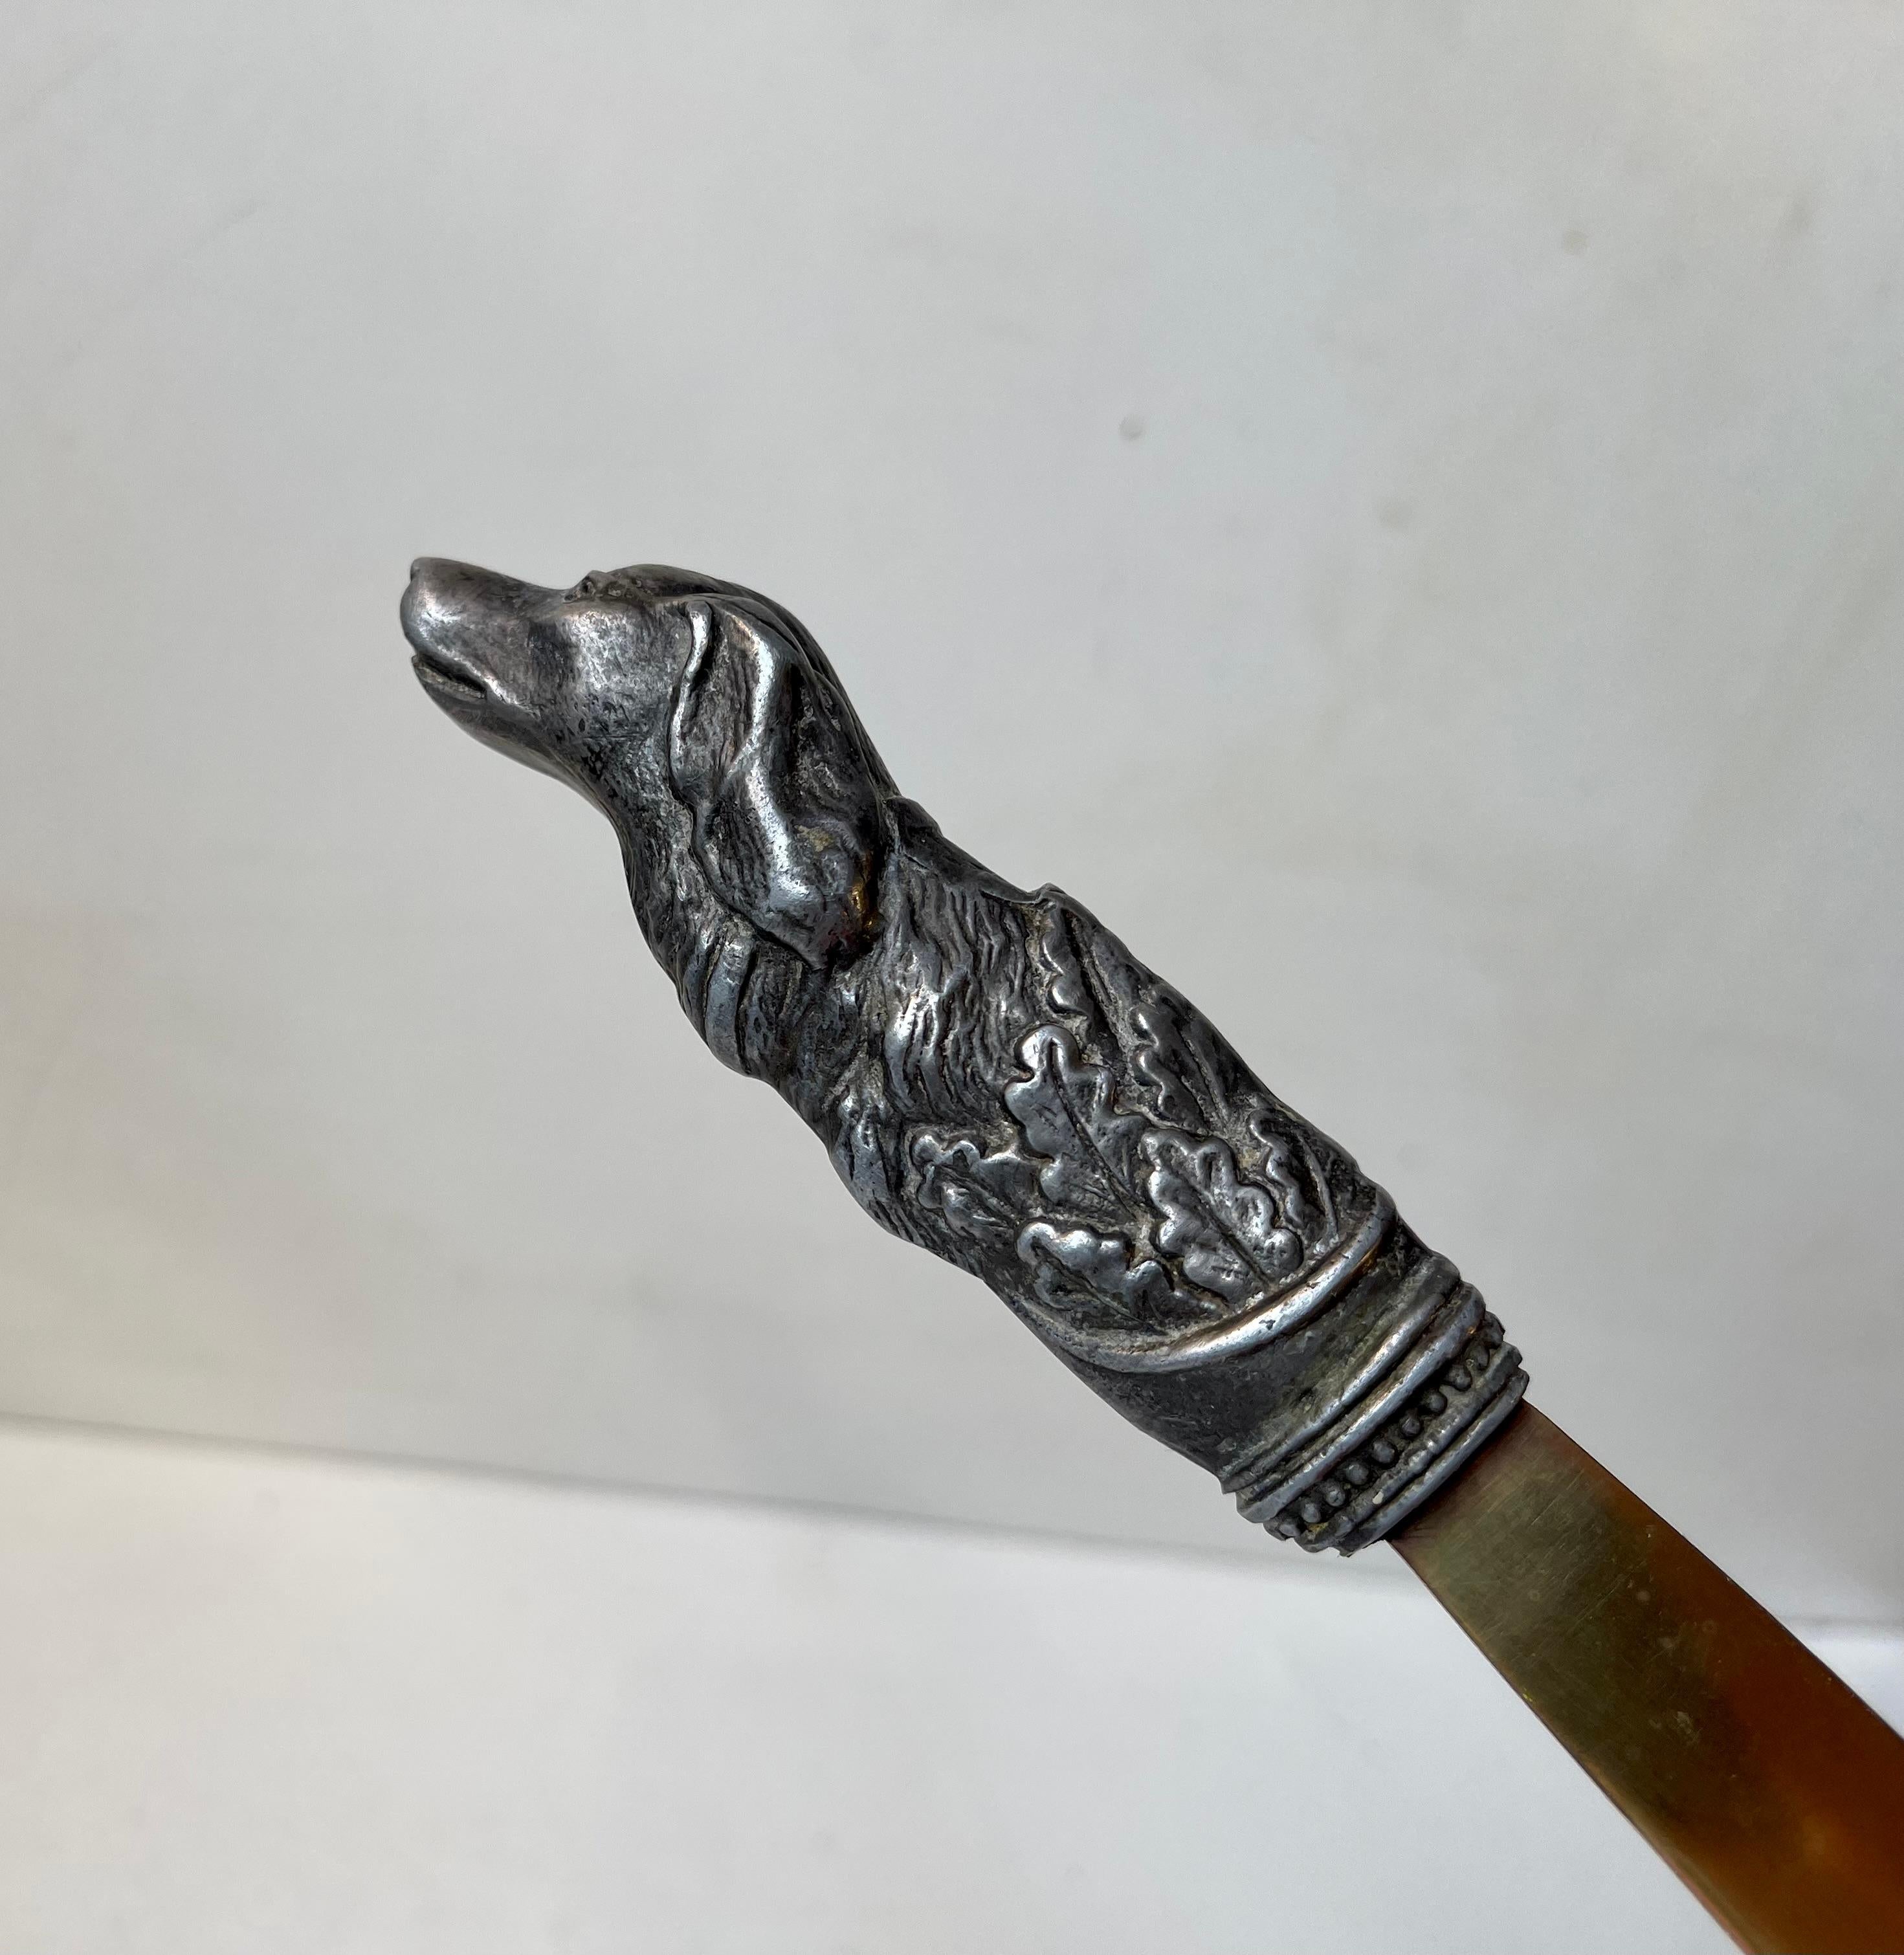 Dagger style letter opener featuring leaf-shaped blade and a handmade pewter handle depicting a hunt dog. It was made in Italy in the mid-late 19 th century by an unknown jeweler or metal craftsman. It has no signature. Measurements: H/L: 24.5 cm,